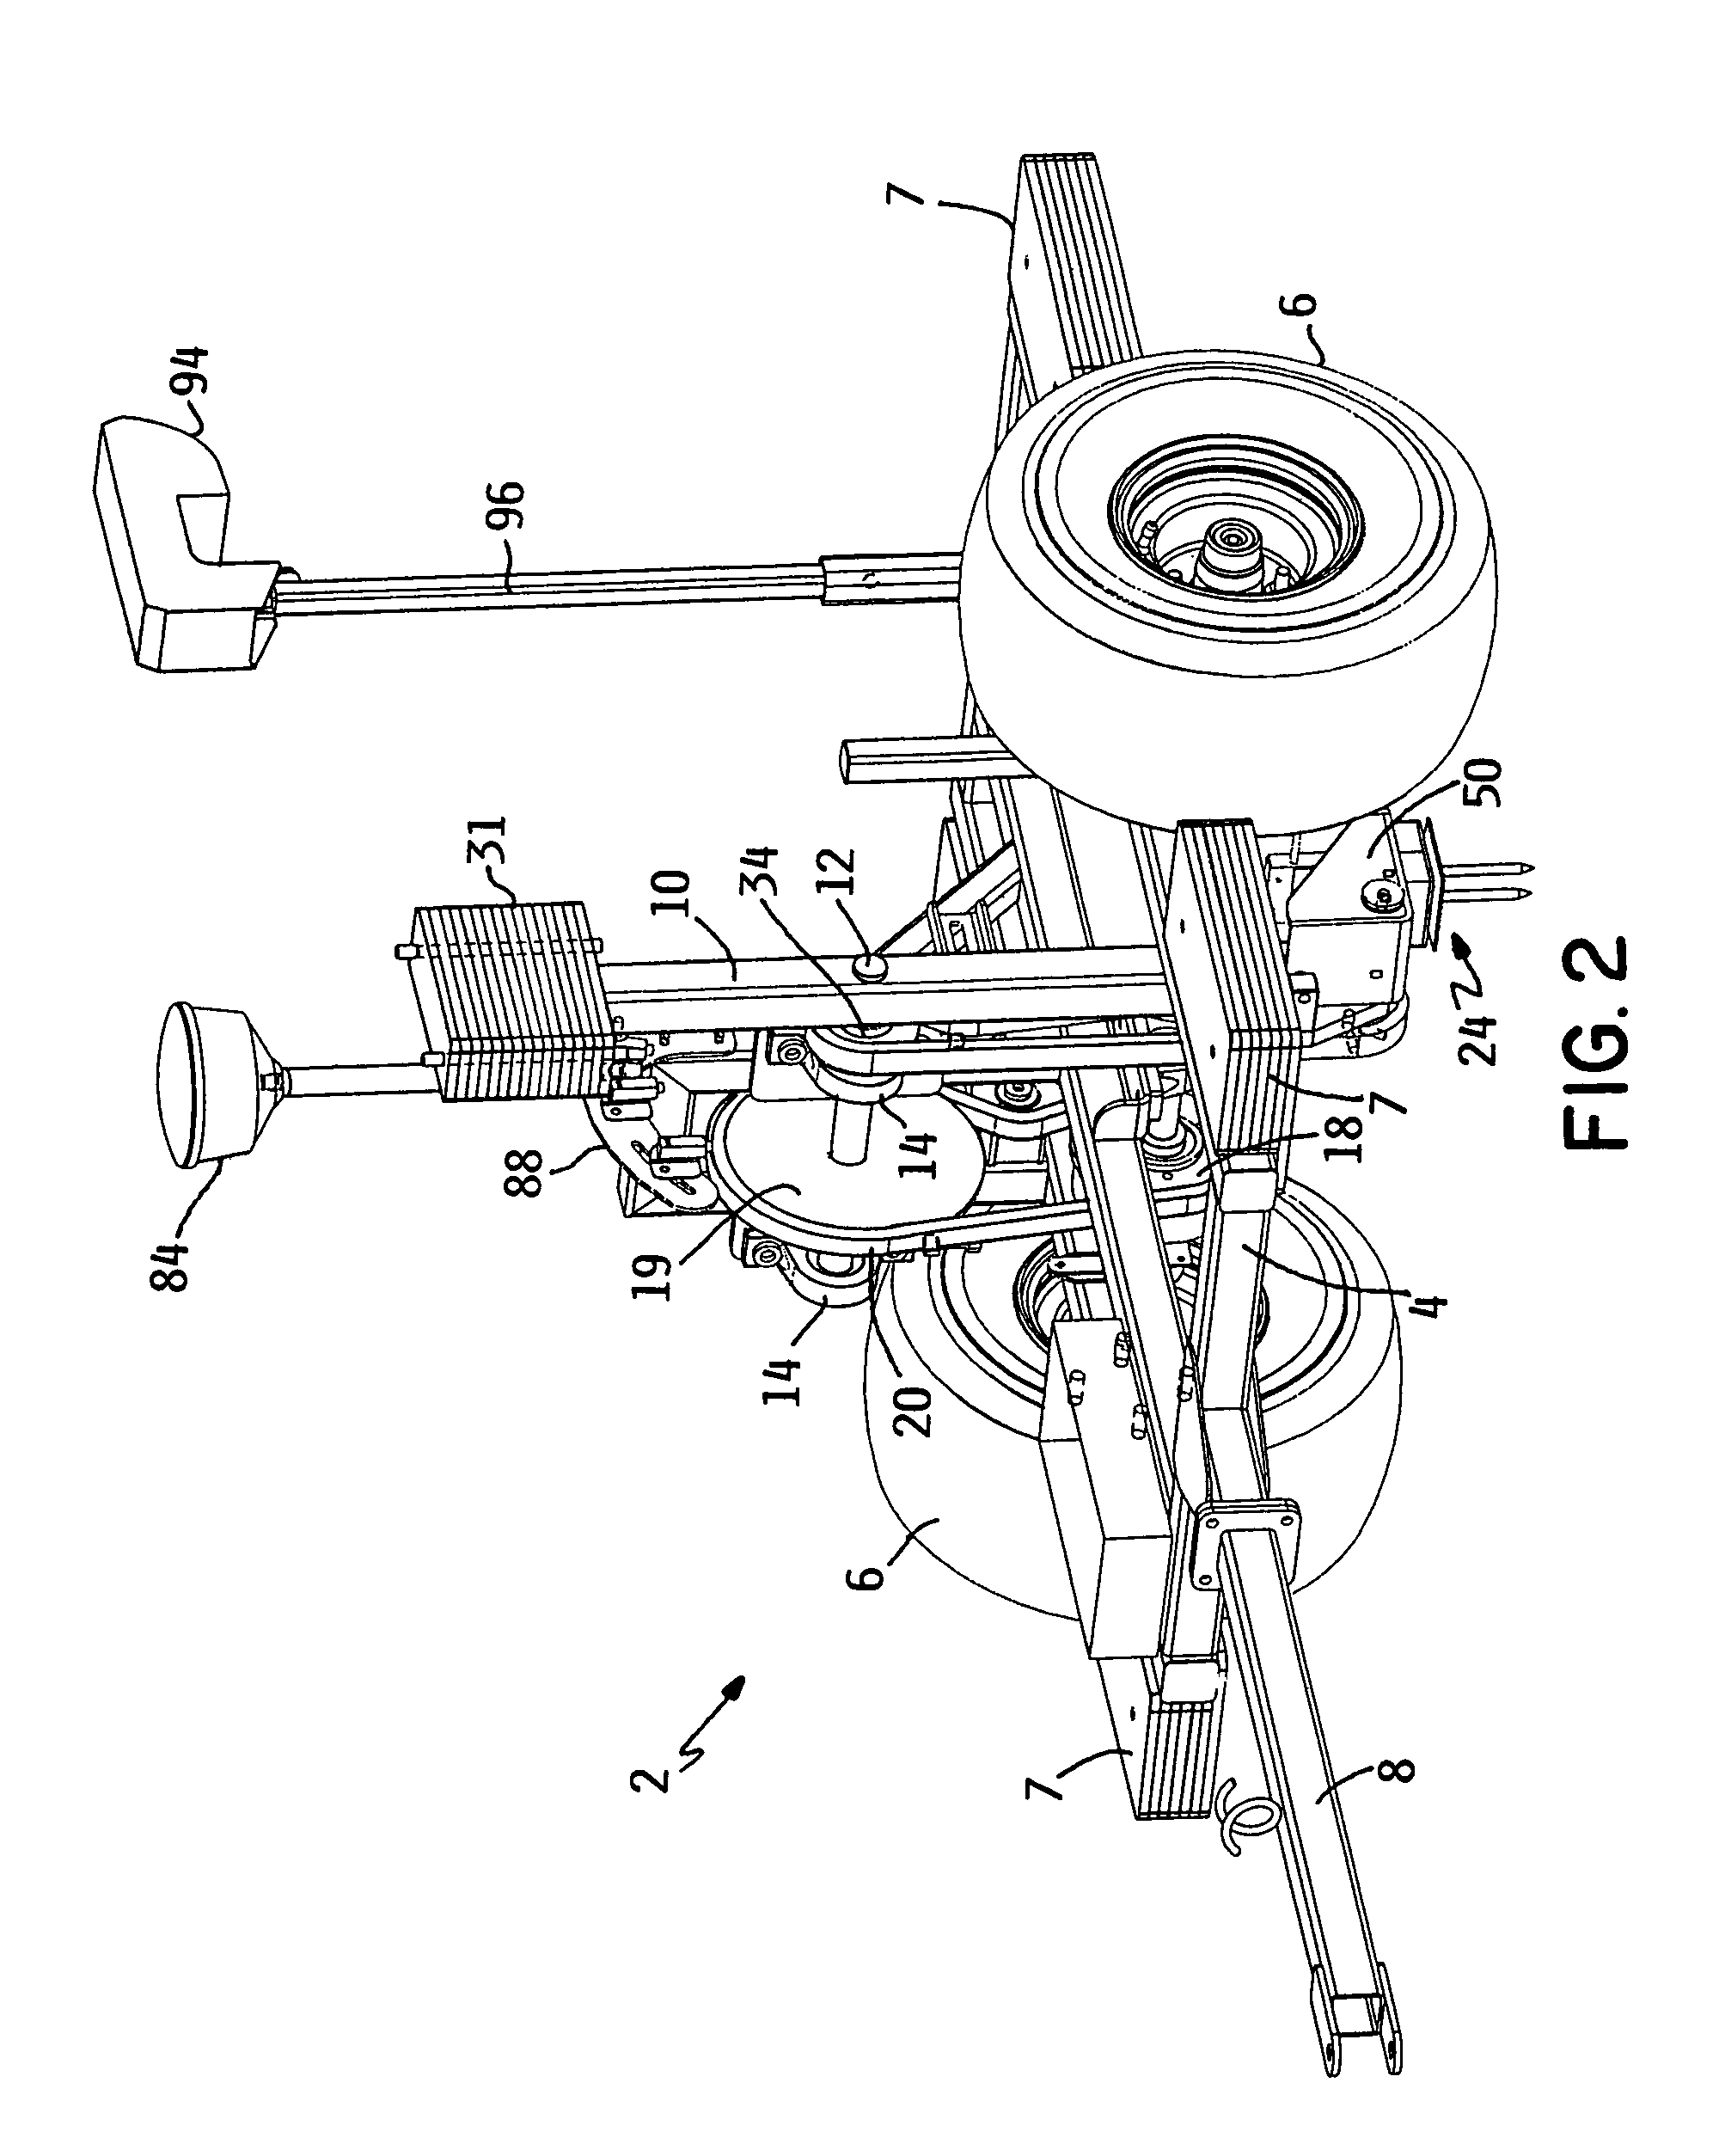 Mobile turf instrument apparatus having driven, periodically insertable, ground penetrating probe assembly